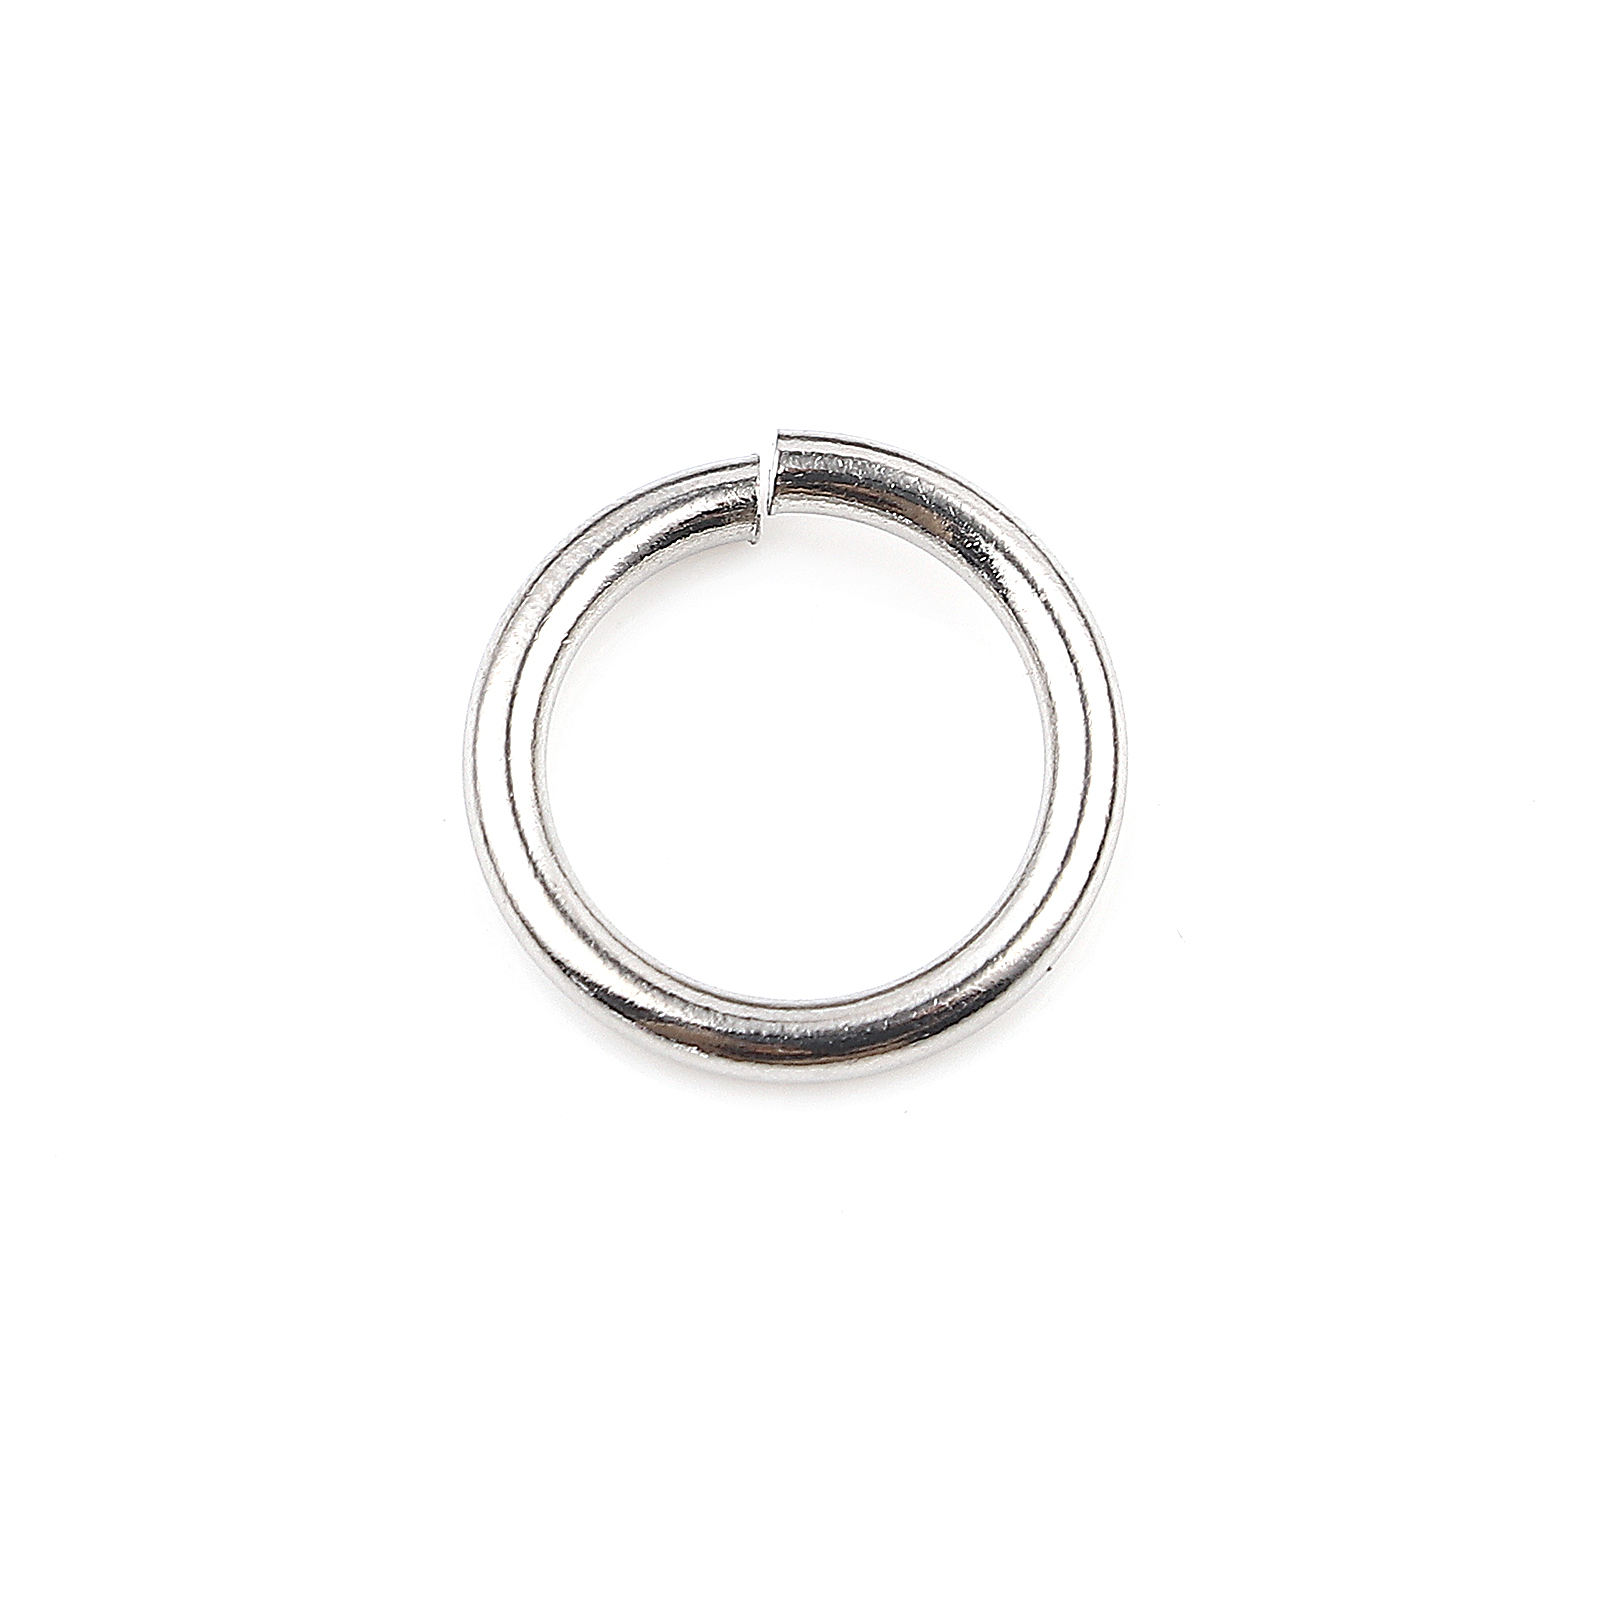 Picture of 1.8mm Stainless Steel Open Jump Rings Findings Round Silver Tone 14mm Dia., 100 PCs